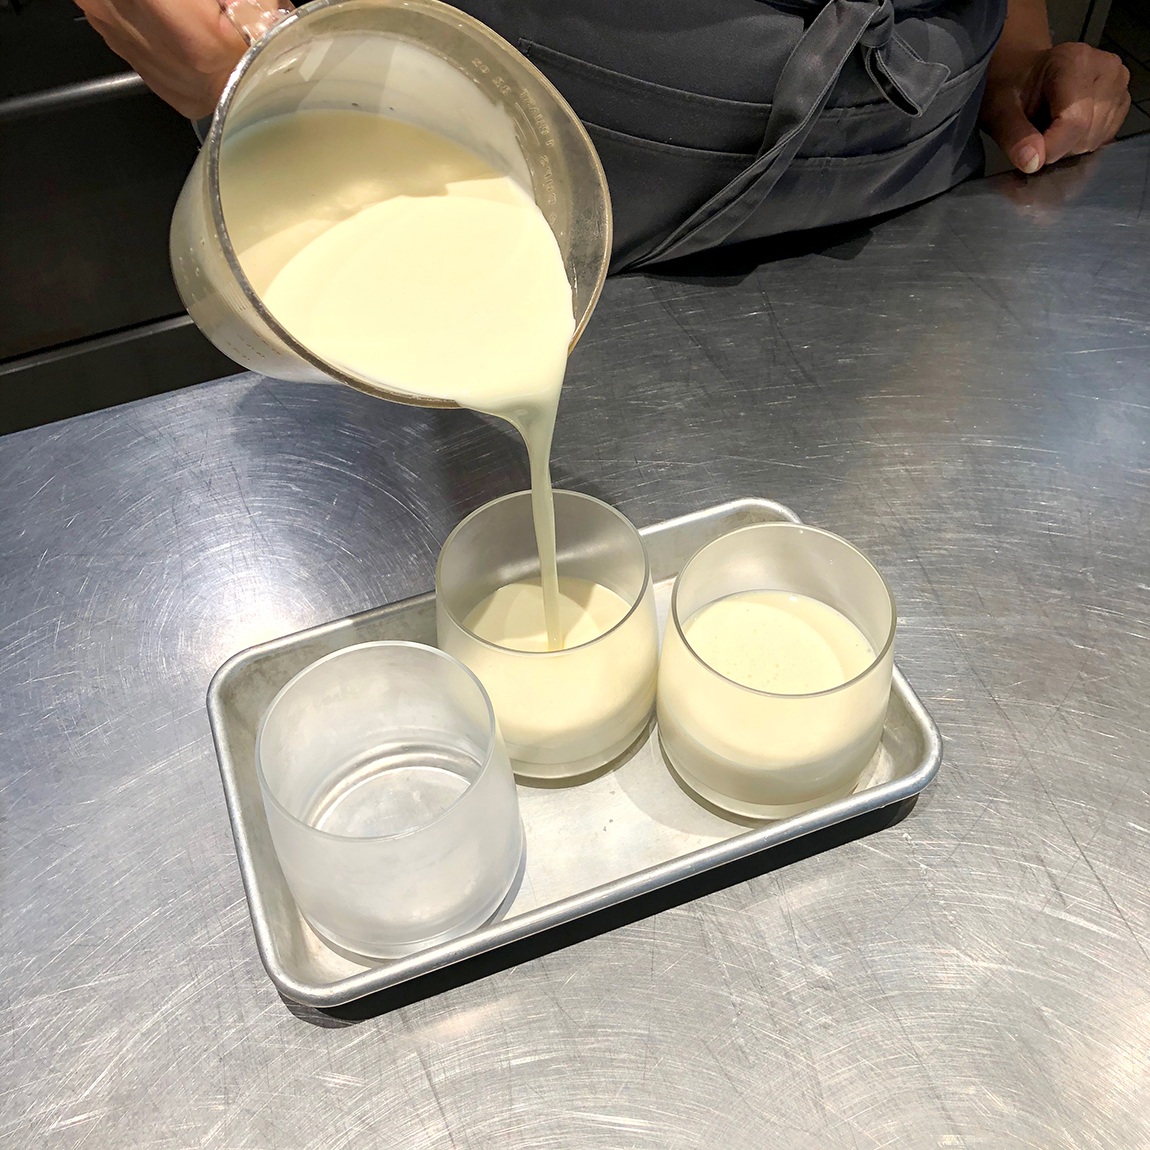 Summer Wright pours vanilla pudding into glass cups on a small baking tray.